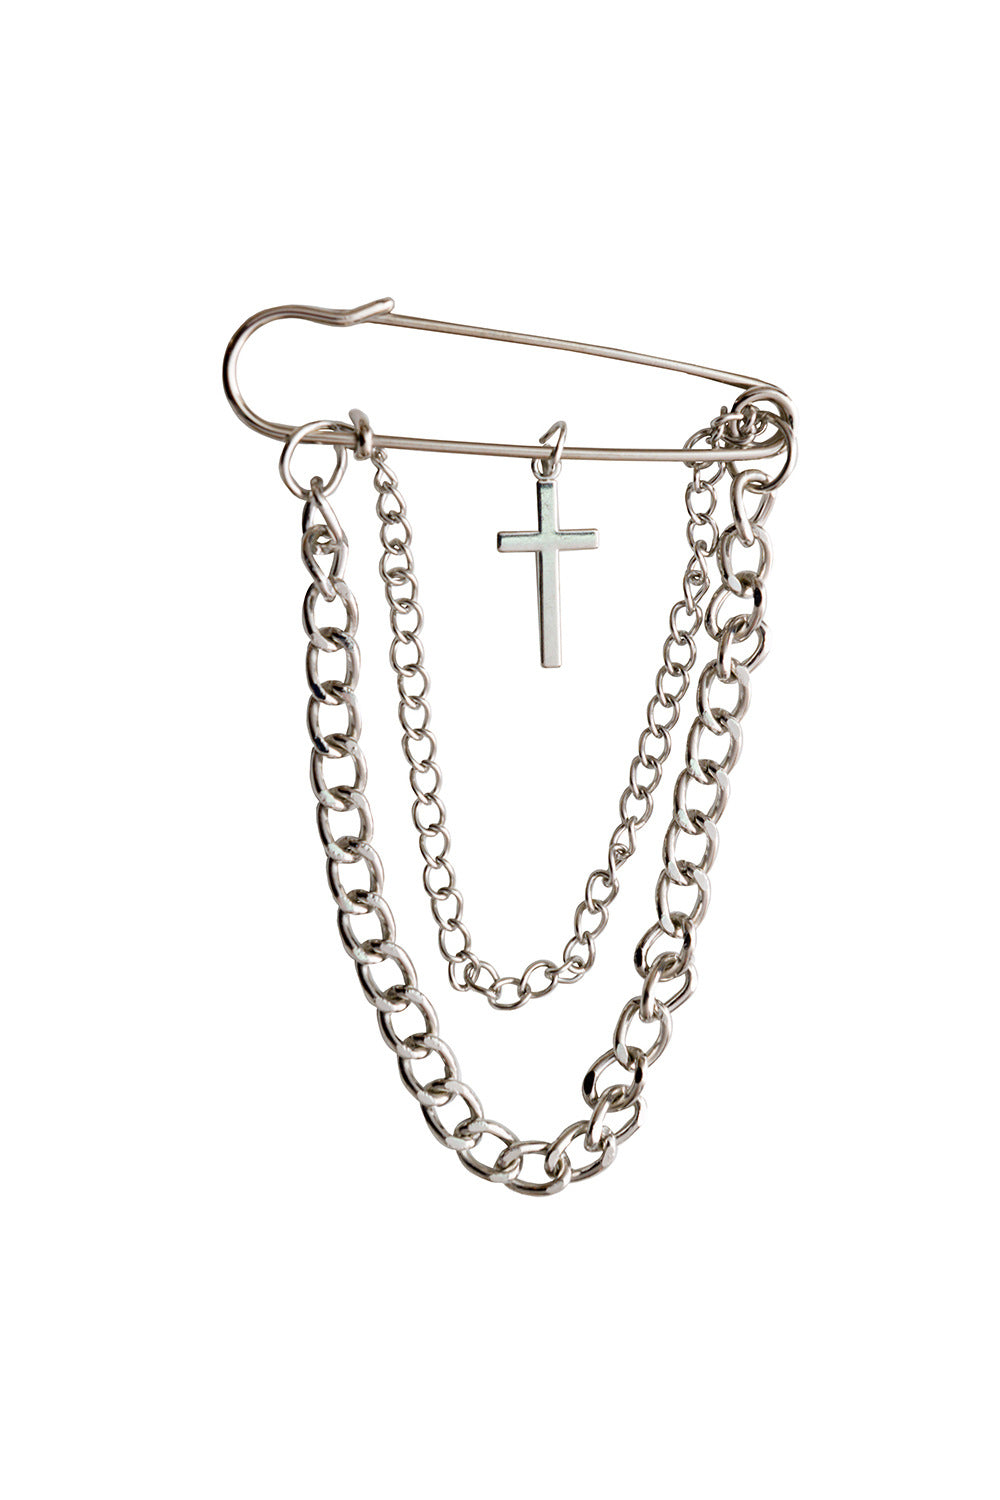 Safety pin brooch with chains and cross charm